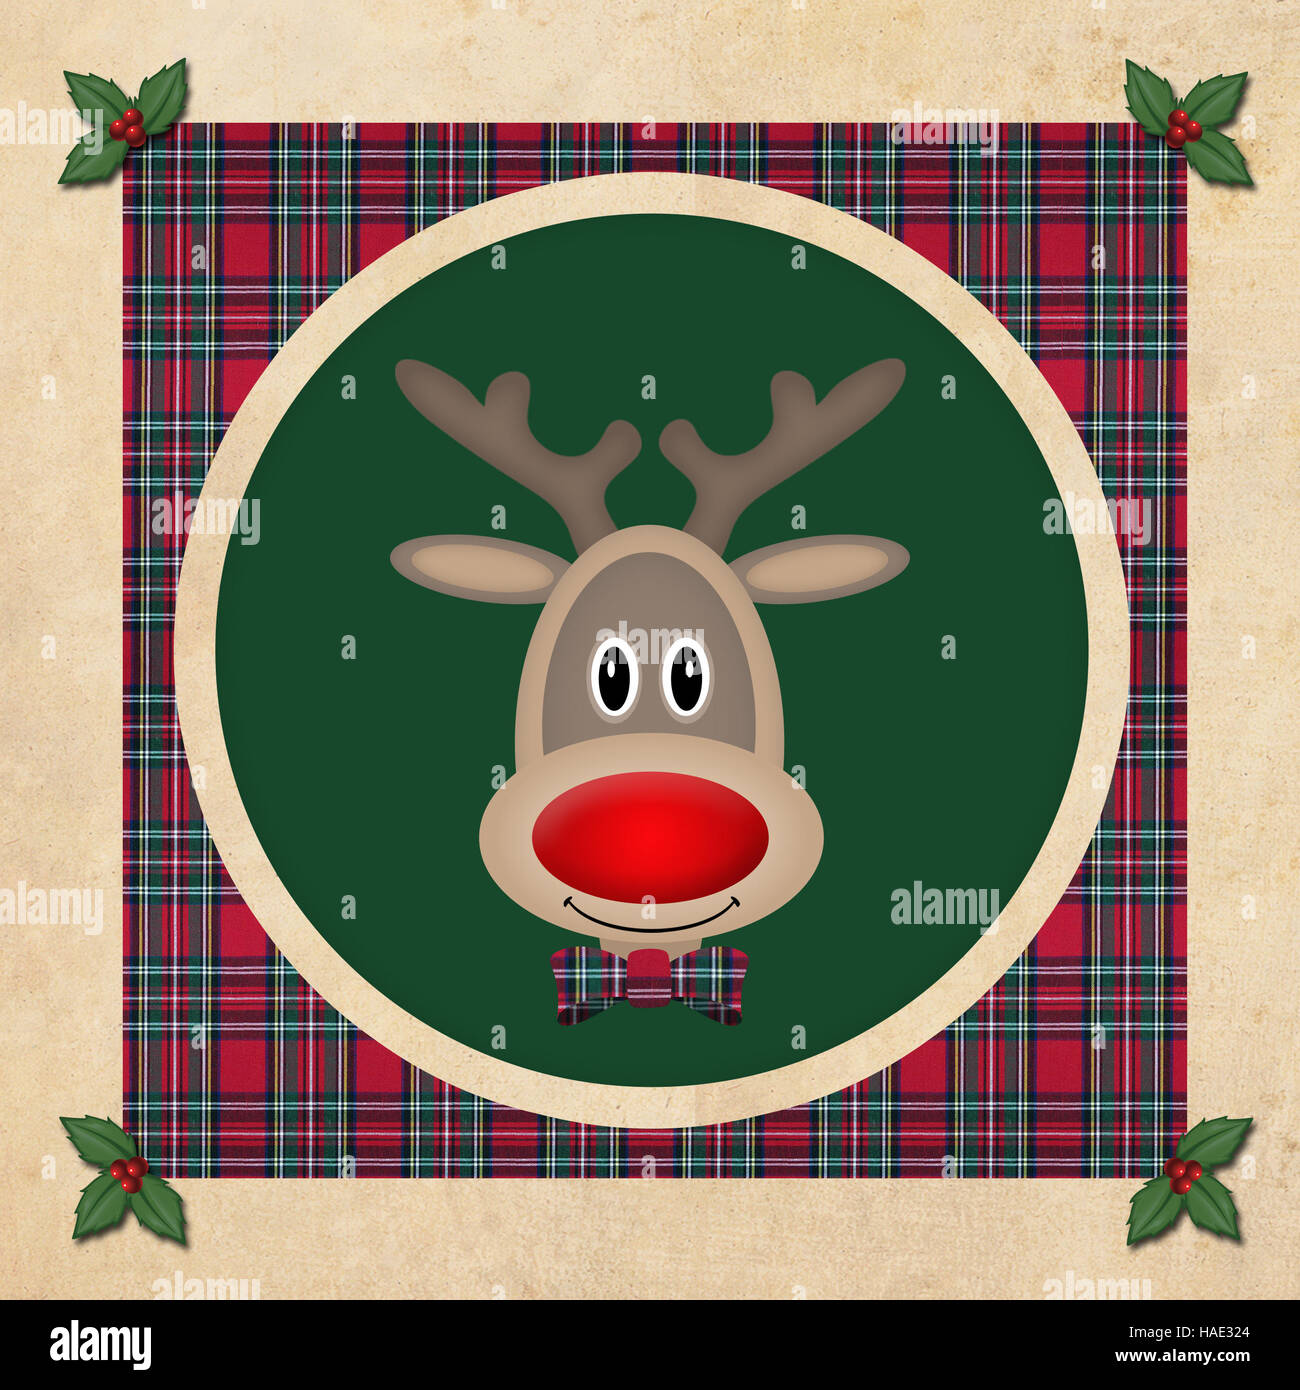 cute reindeer in green circle with red plaid pattern, on old paper background, christmas card design Stock Photo